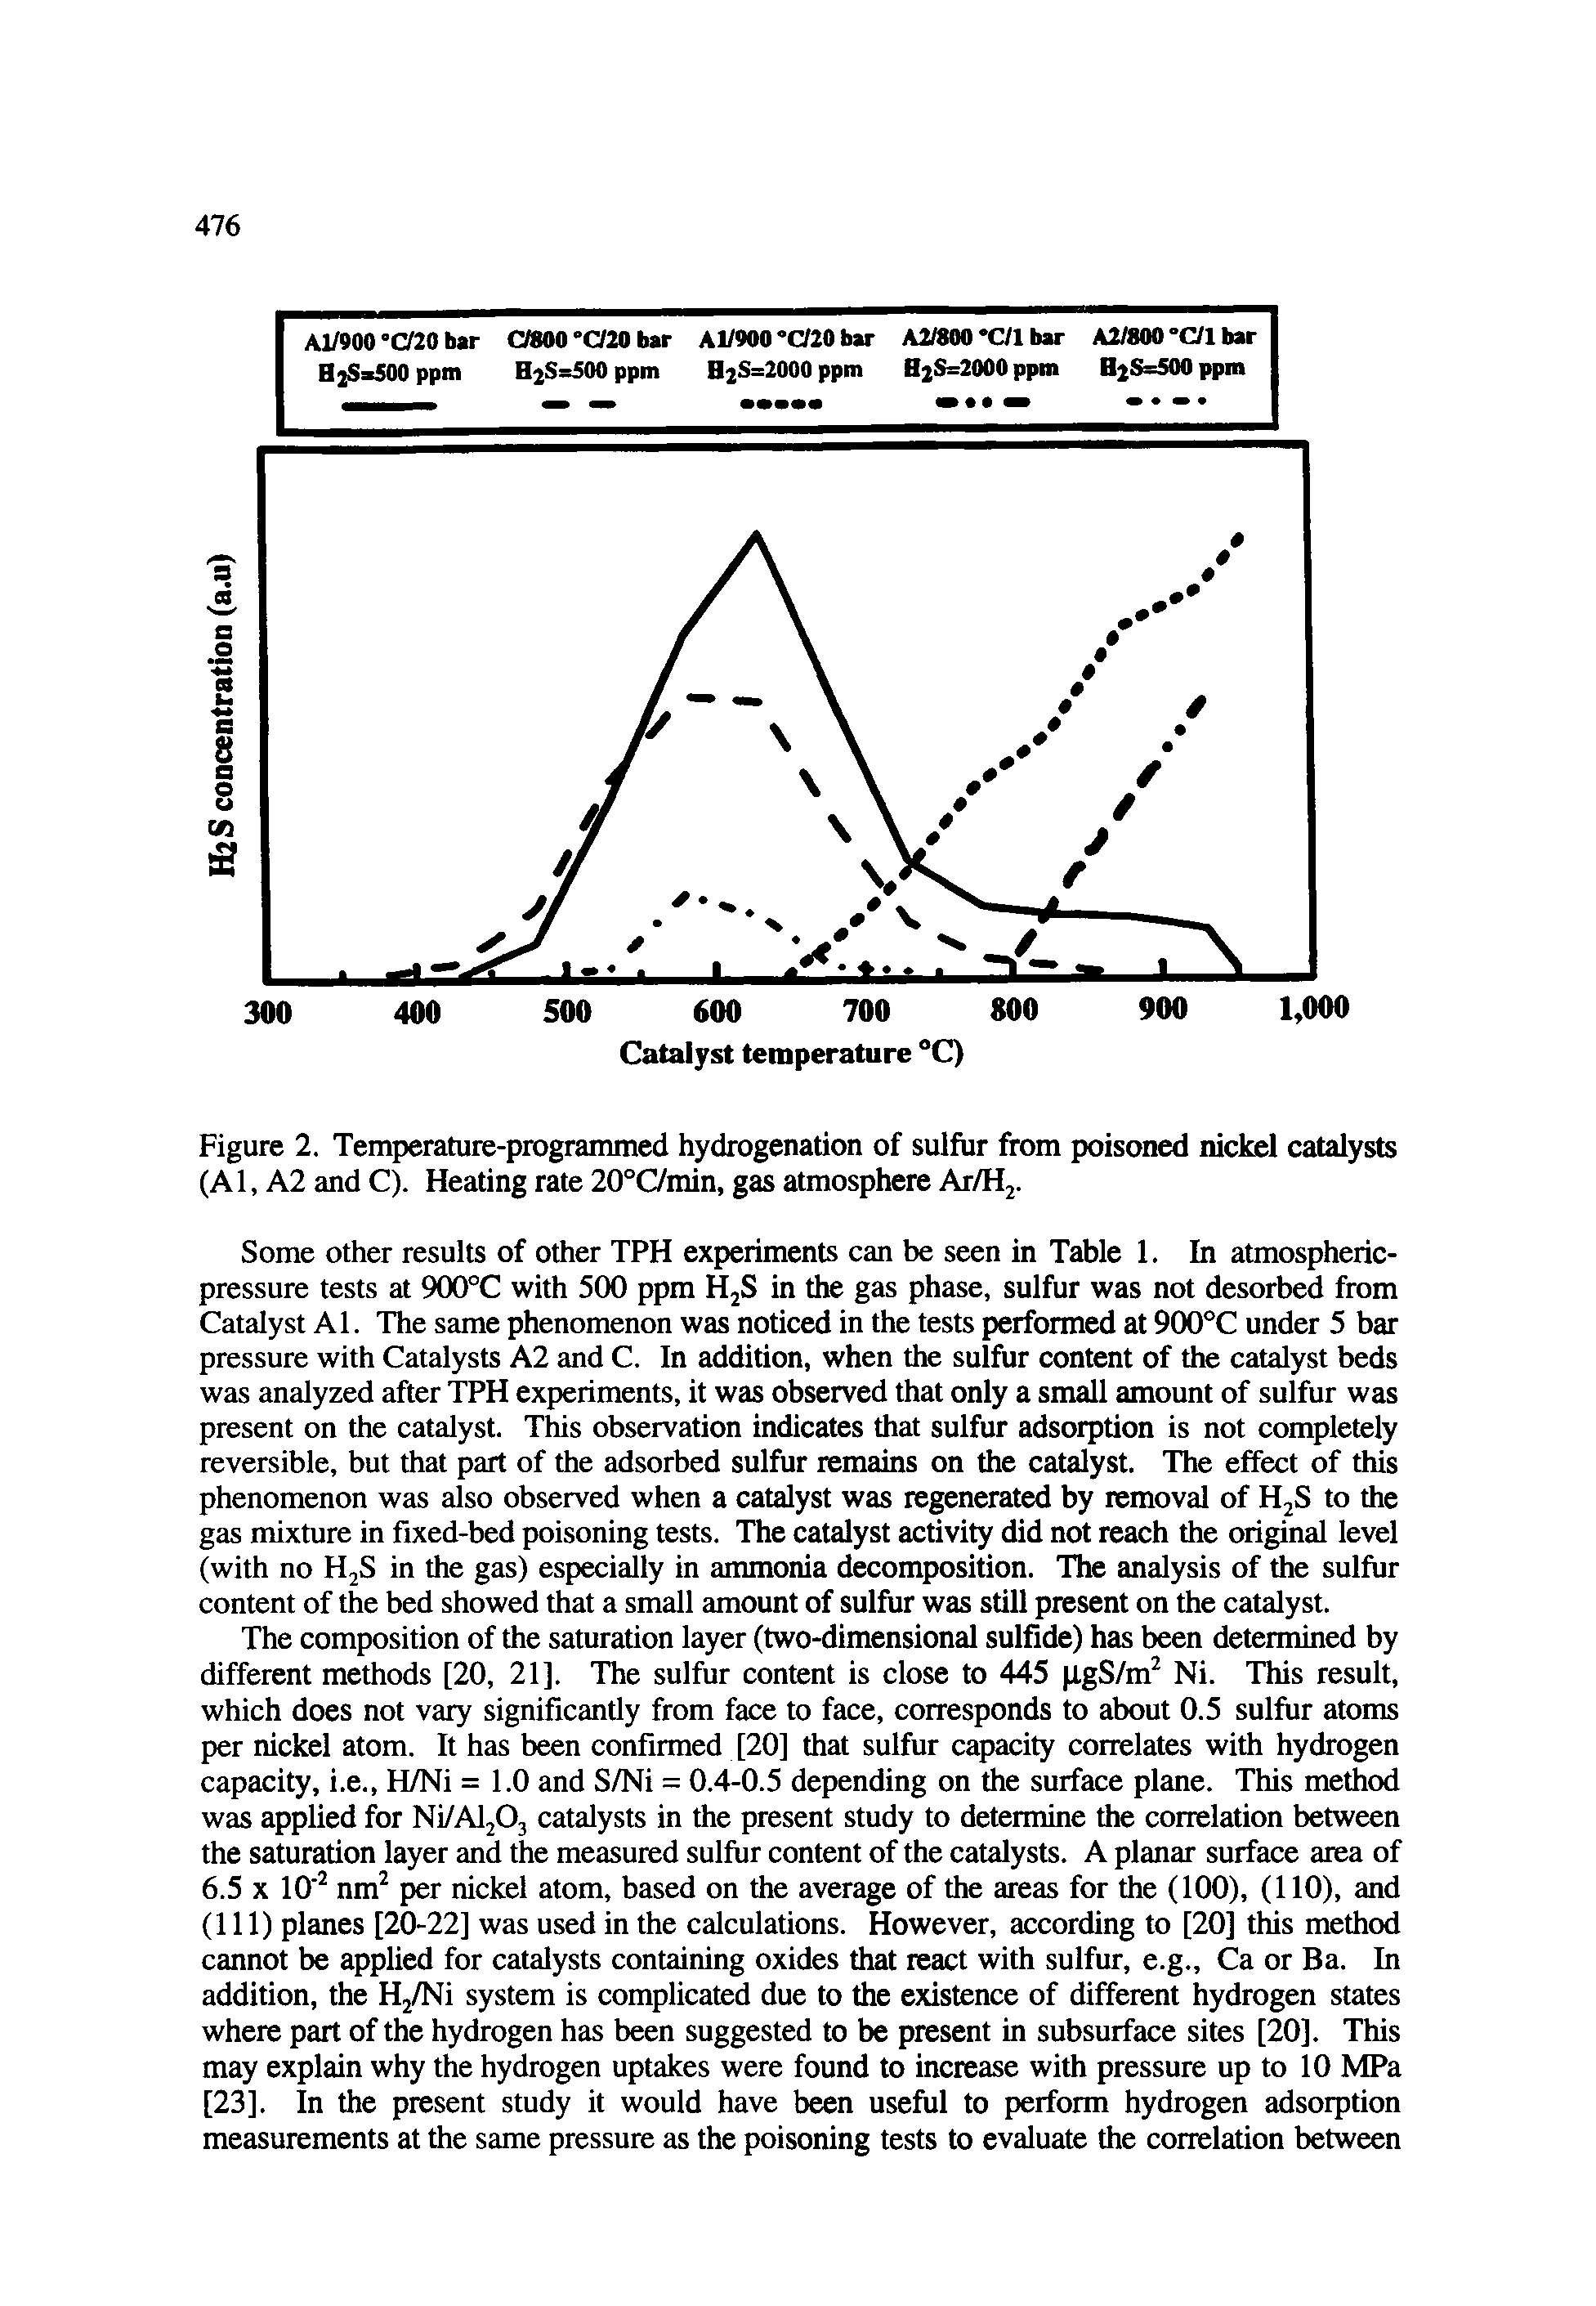 Figure 2. Temperature-programmed hydrogenation of sulfur from poisoned nickel catalysts (Al, A2 and C). Heating rate 20°C/min, gas atmosphere Ar/Hj.